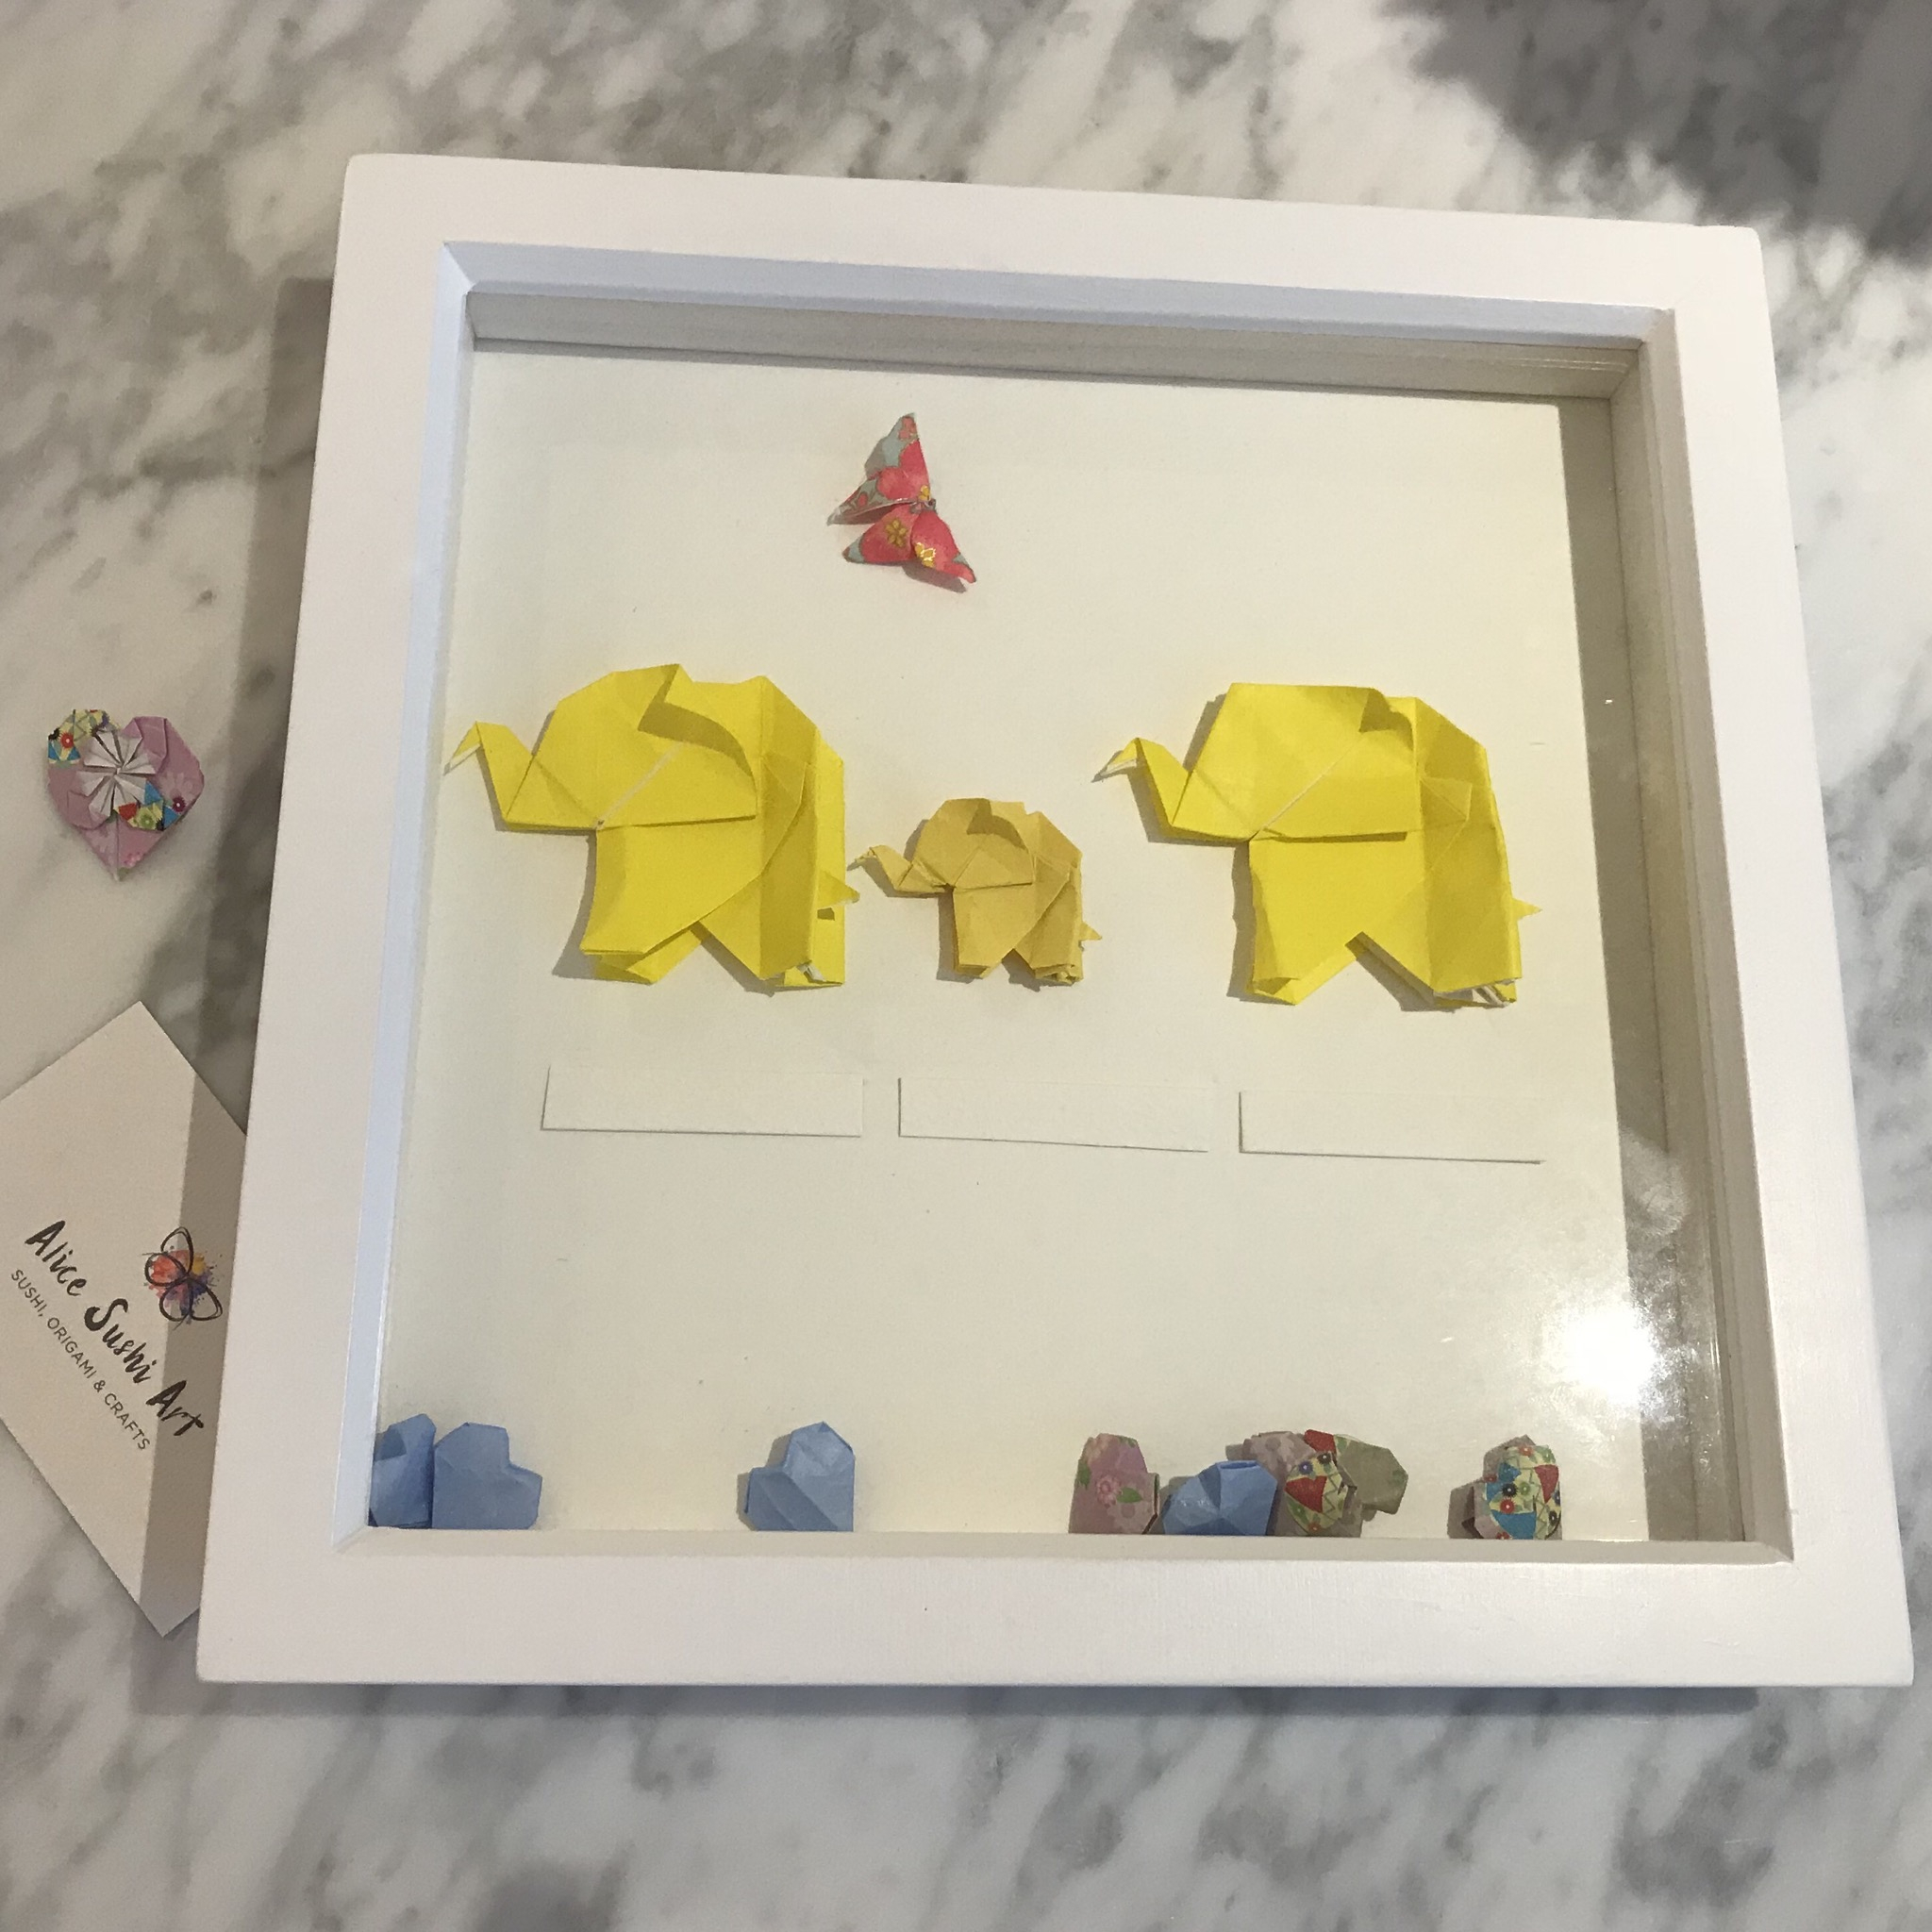 Baby Elephant Origami Custom Made Origami Pieces For New Ba Gifts Alice Sushi Art